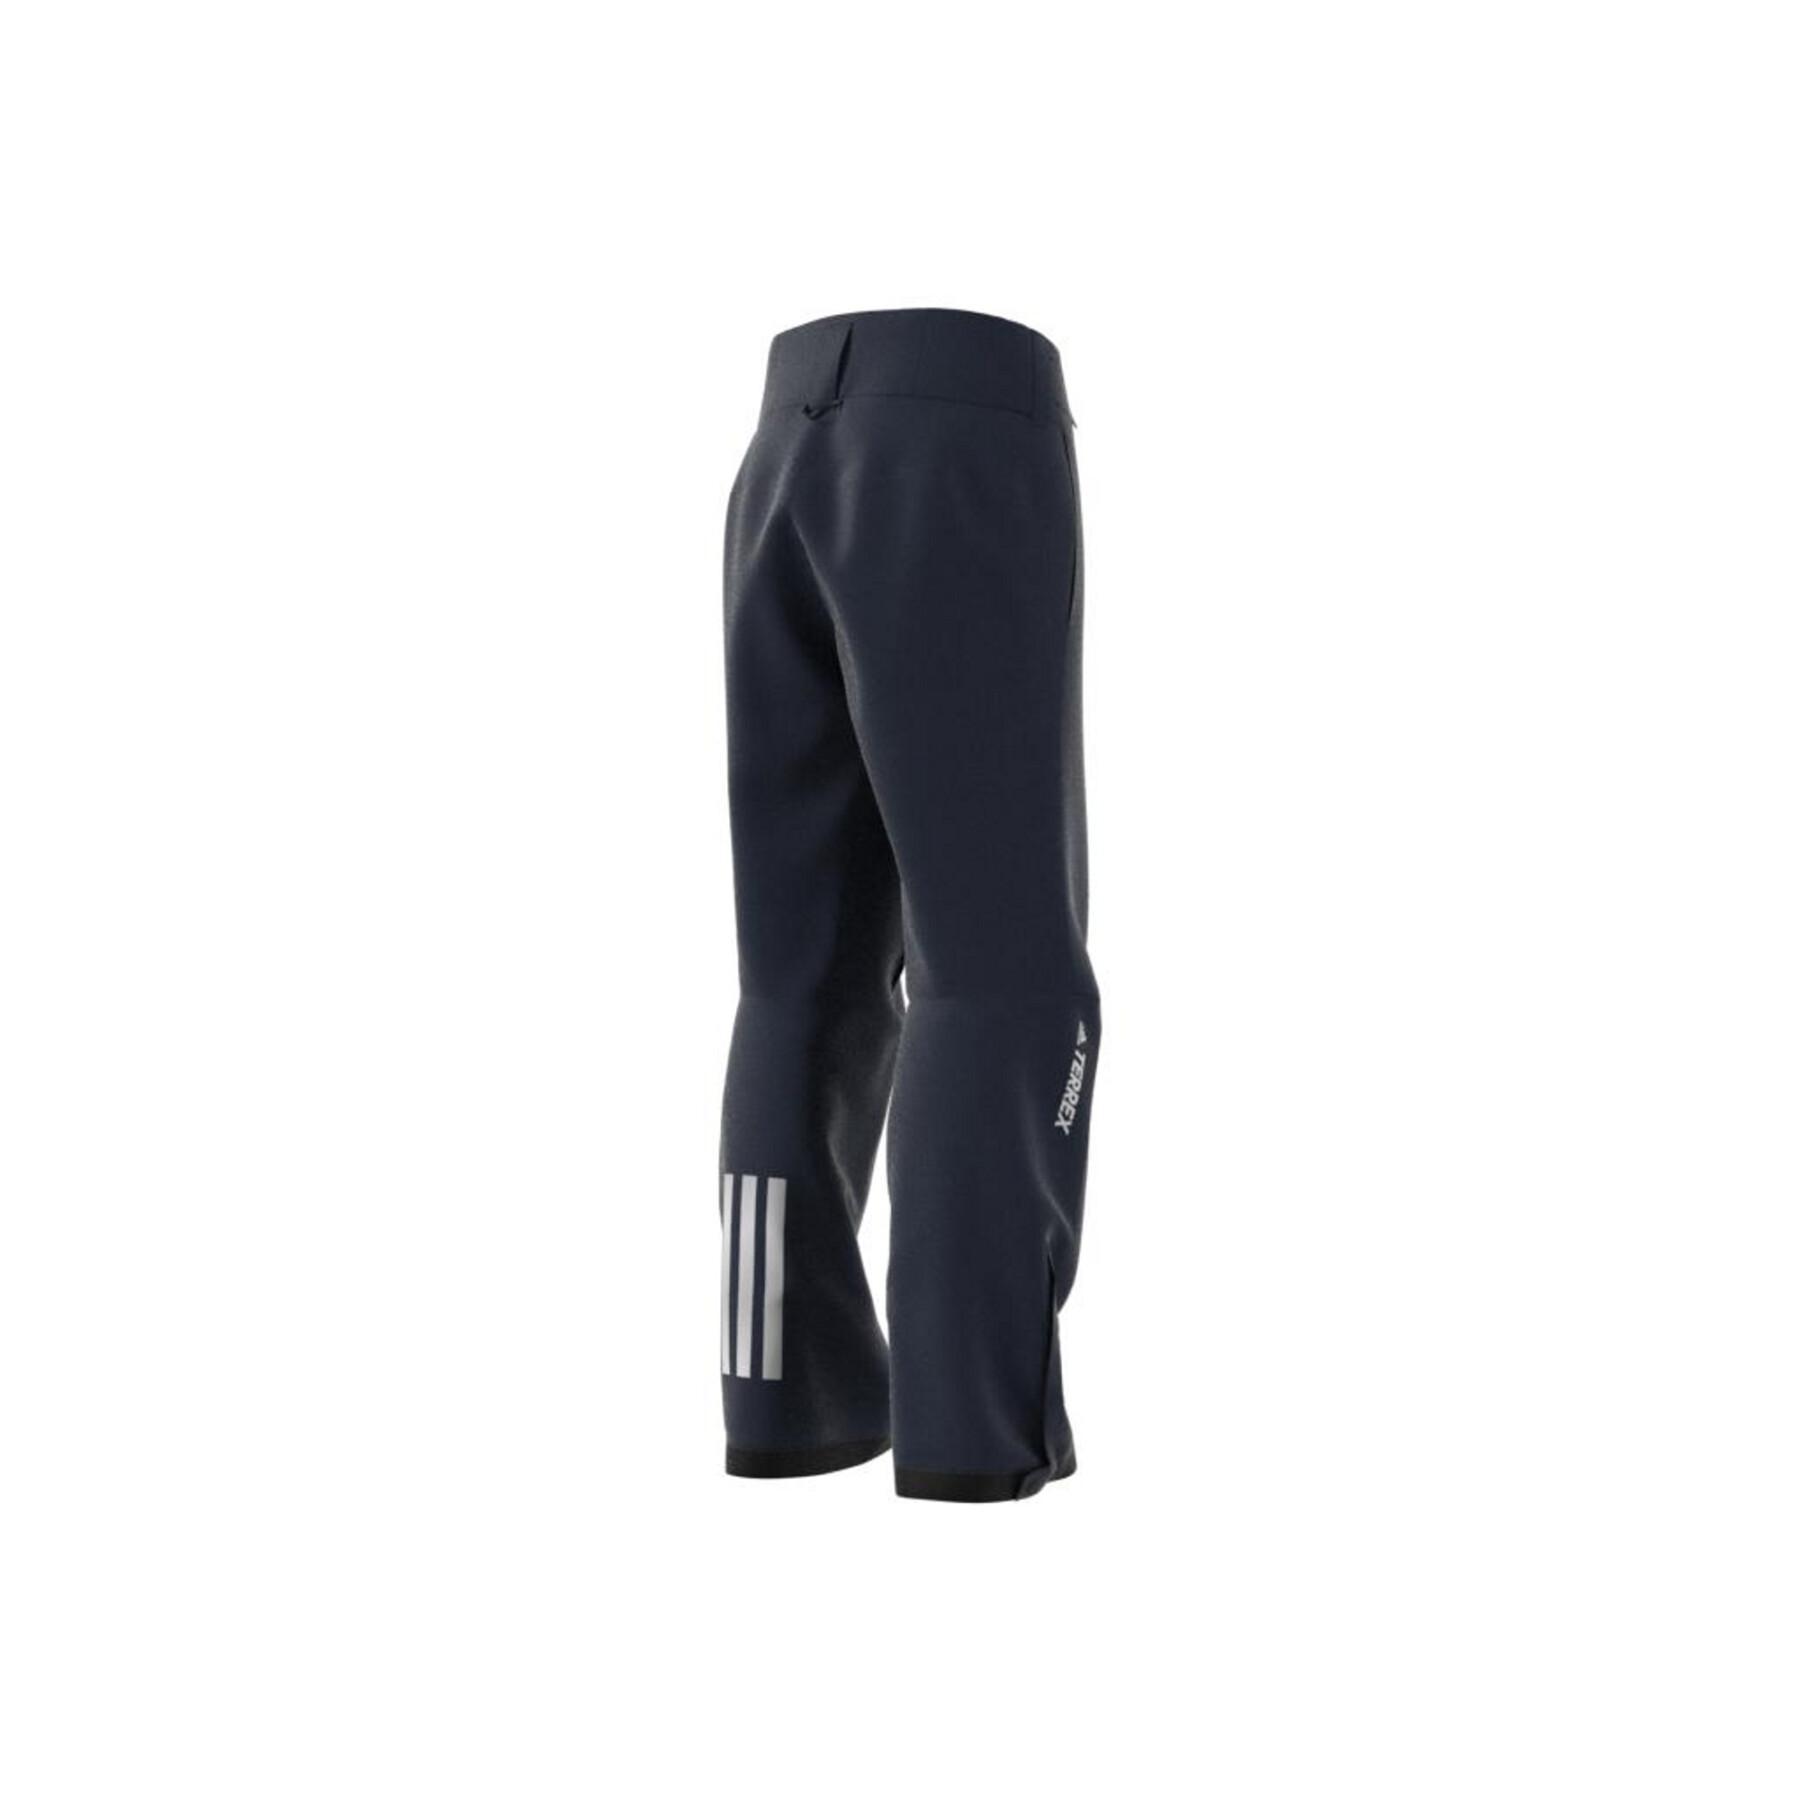 Byxor adidas Resort Two-Layer Insulated